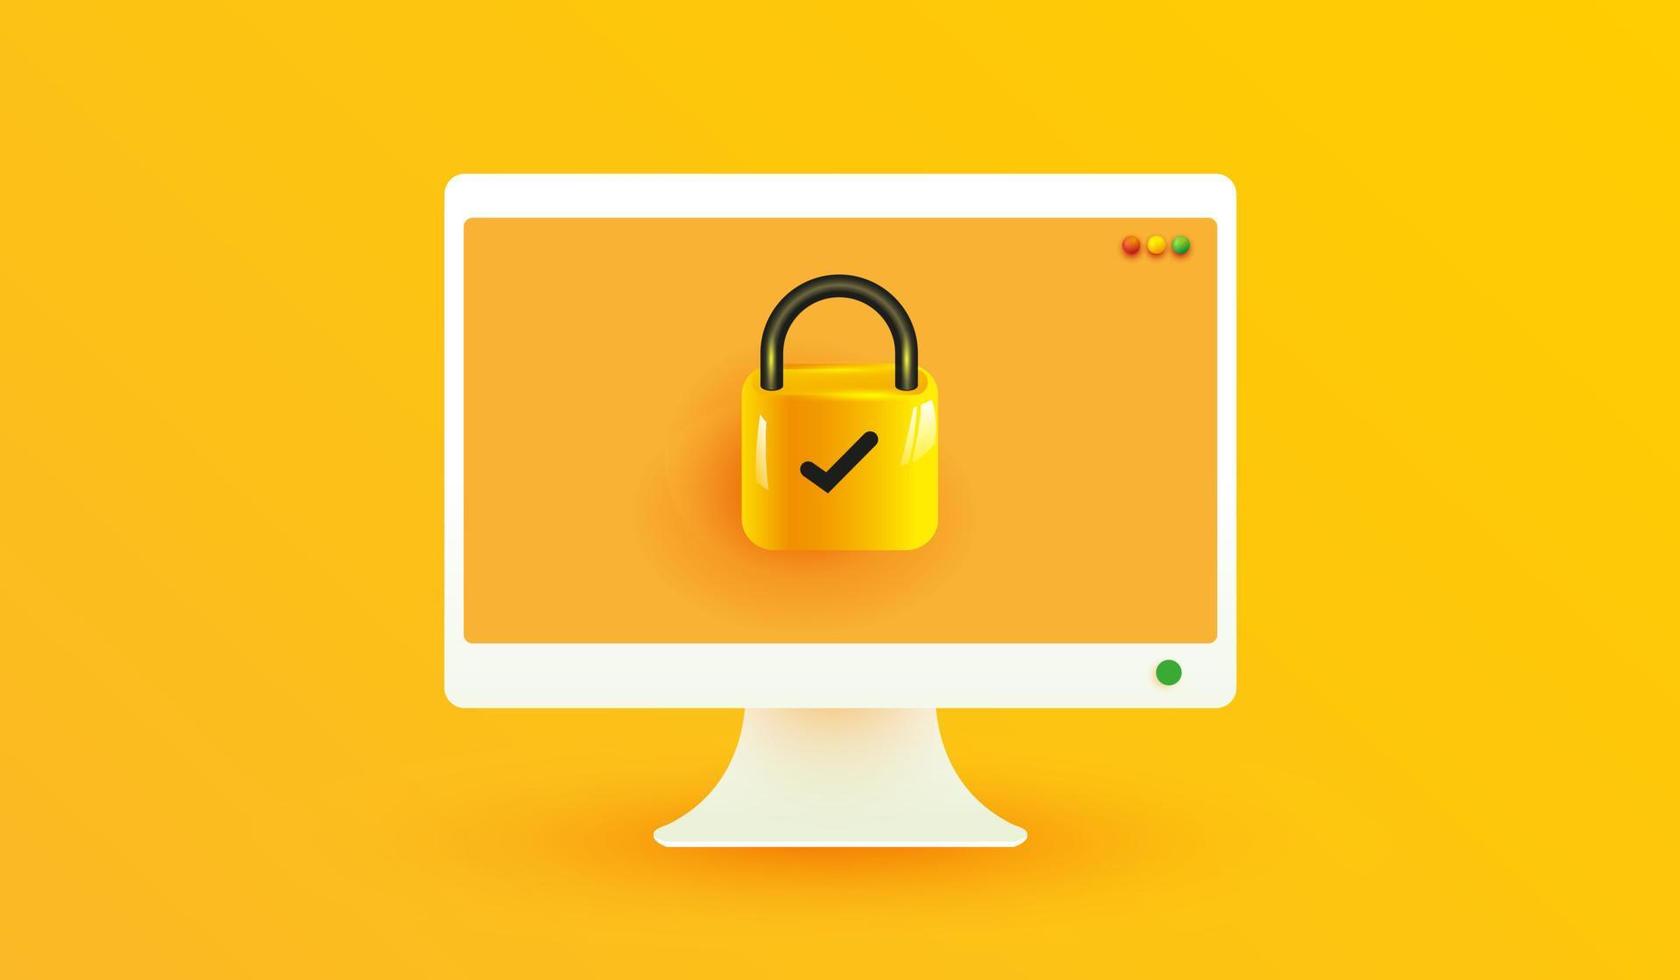 Computer security icon. Password protected icon on yellow backround for mobile applications and website concept 3d vector illustration style